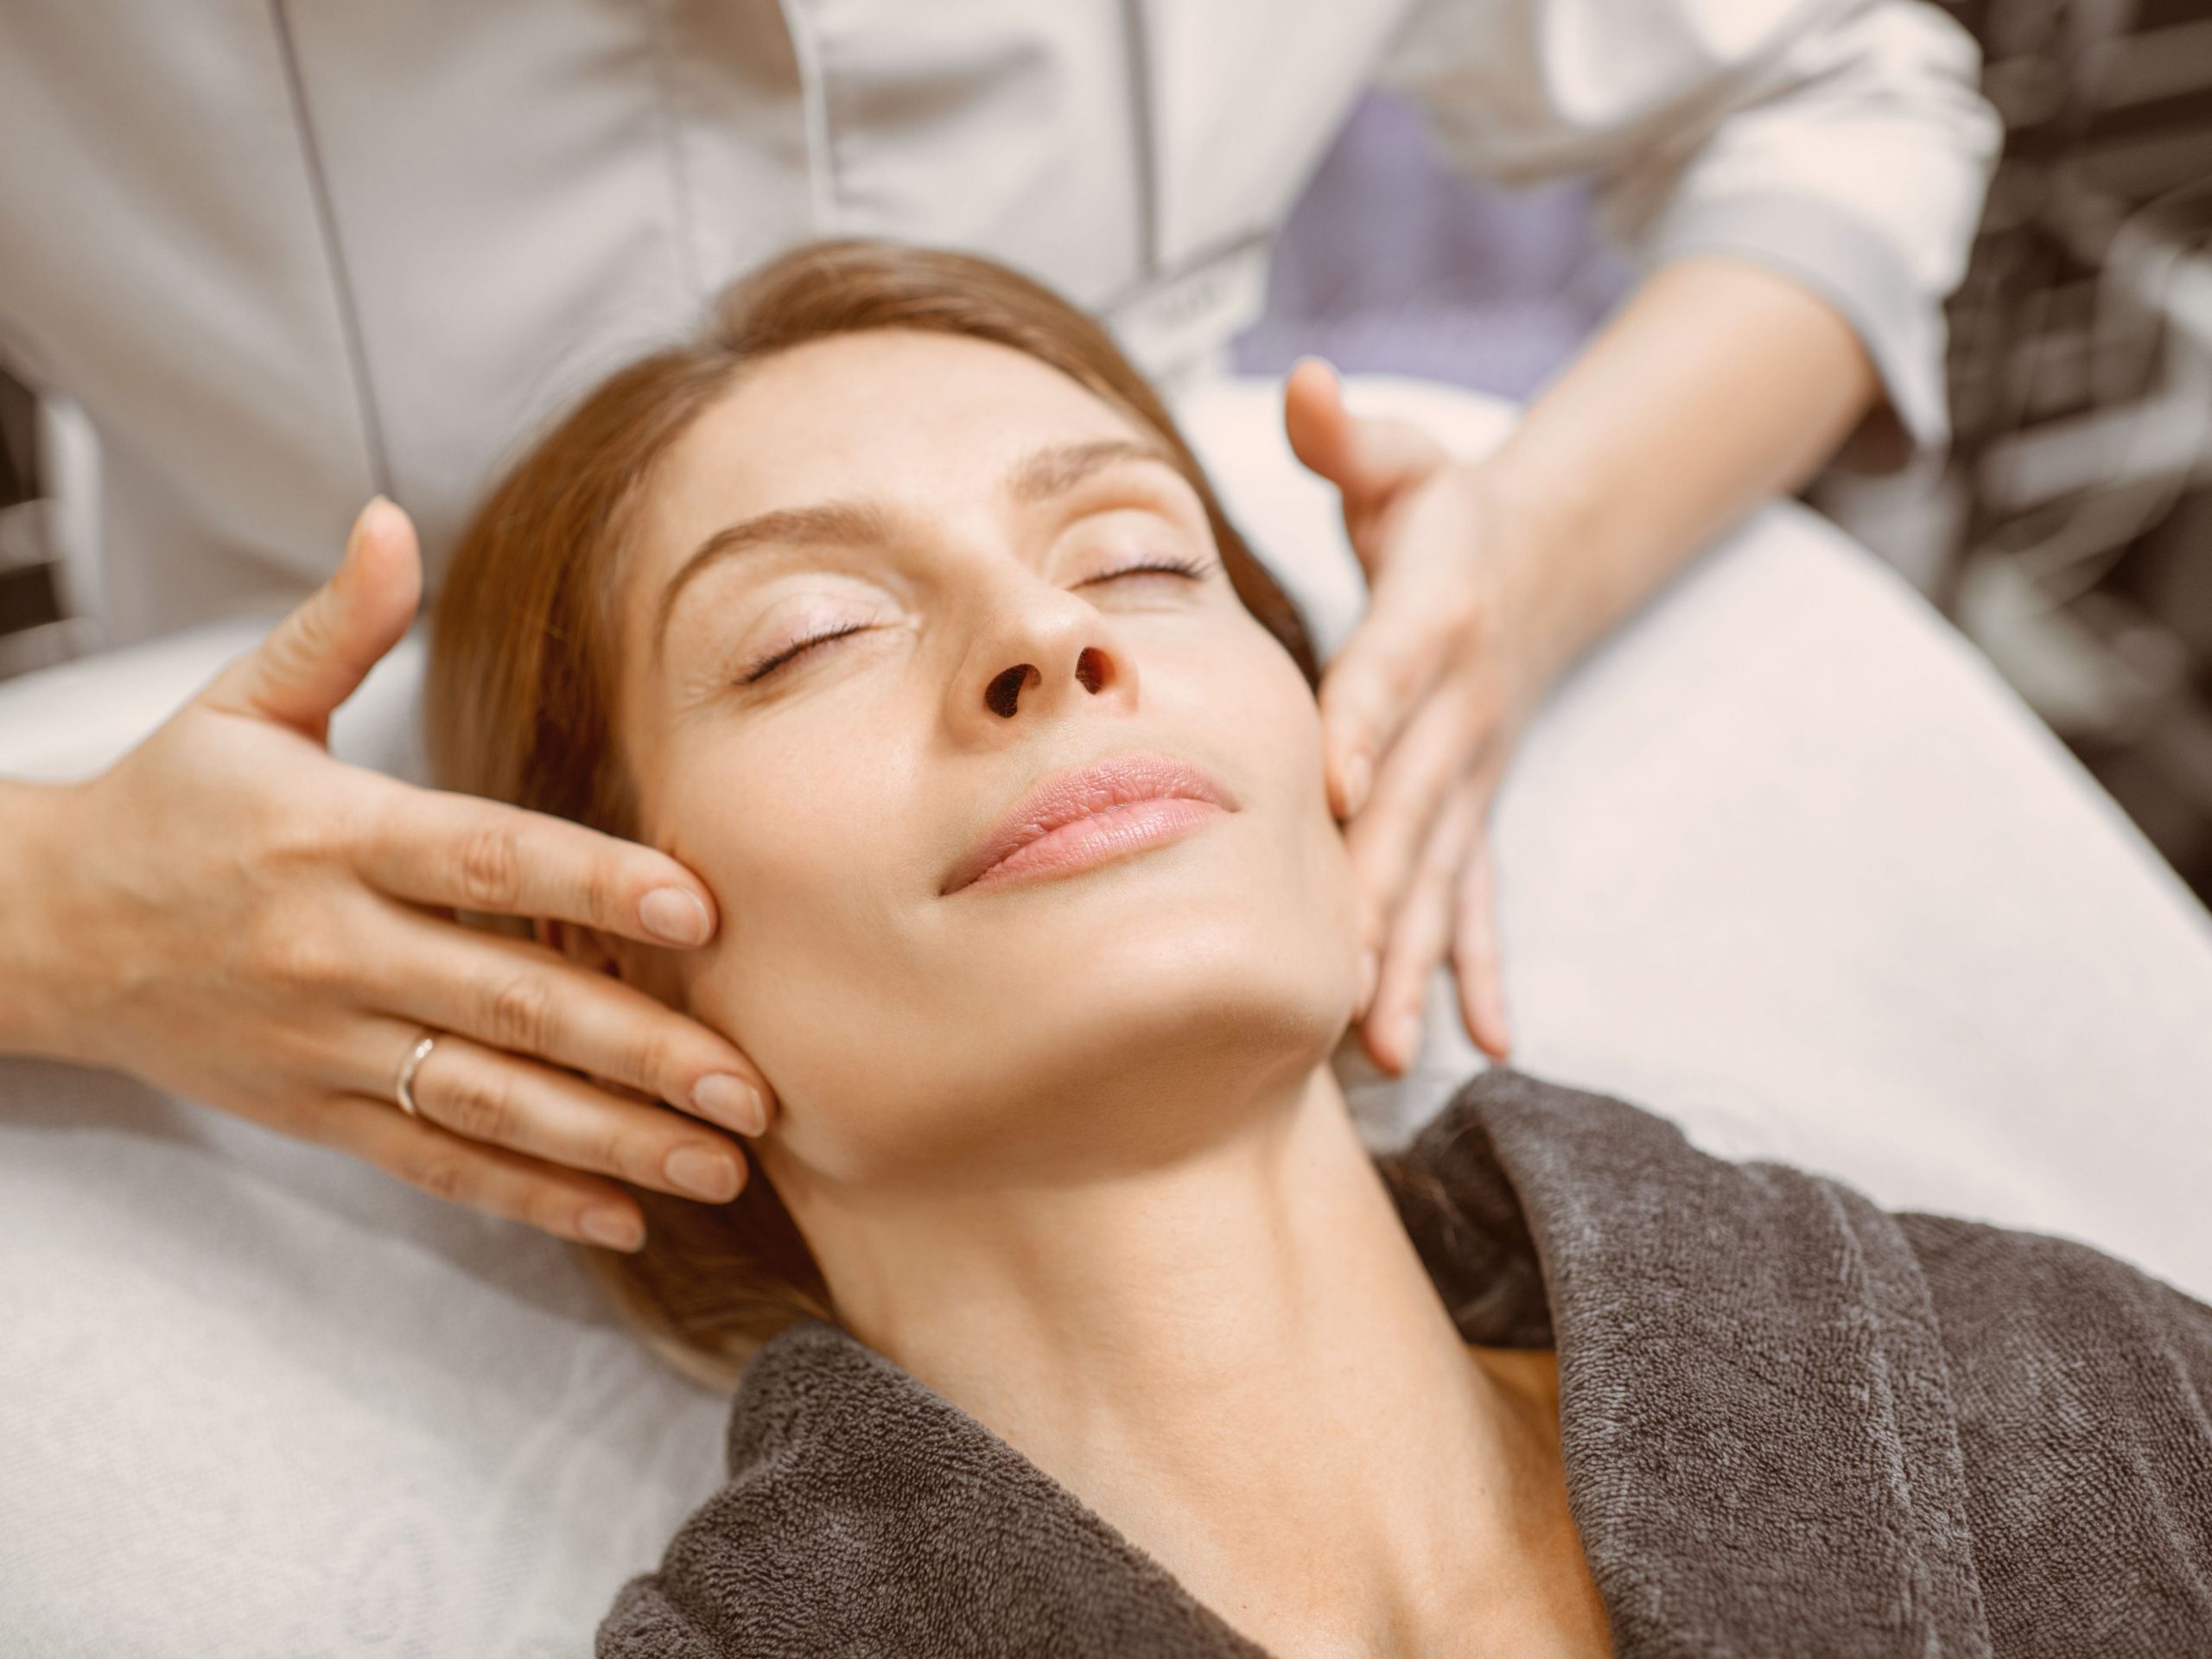 Facial Lymphatic Drainage: 15 benefits of lymphatic drainage on face